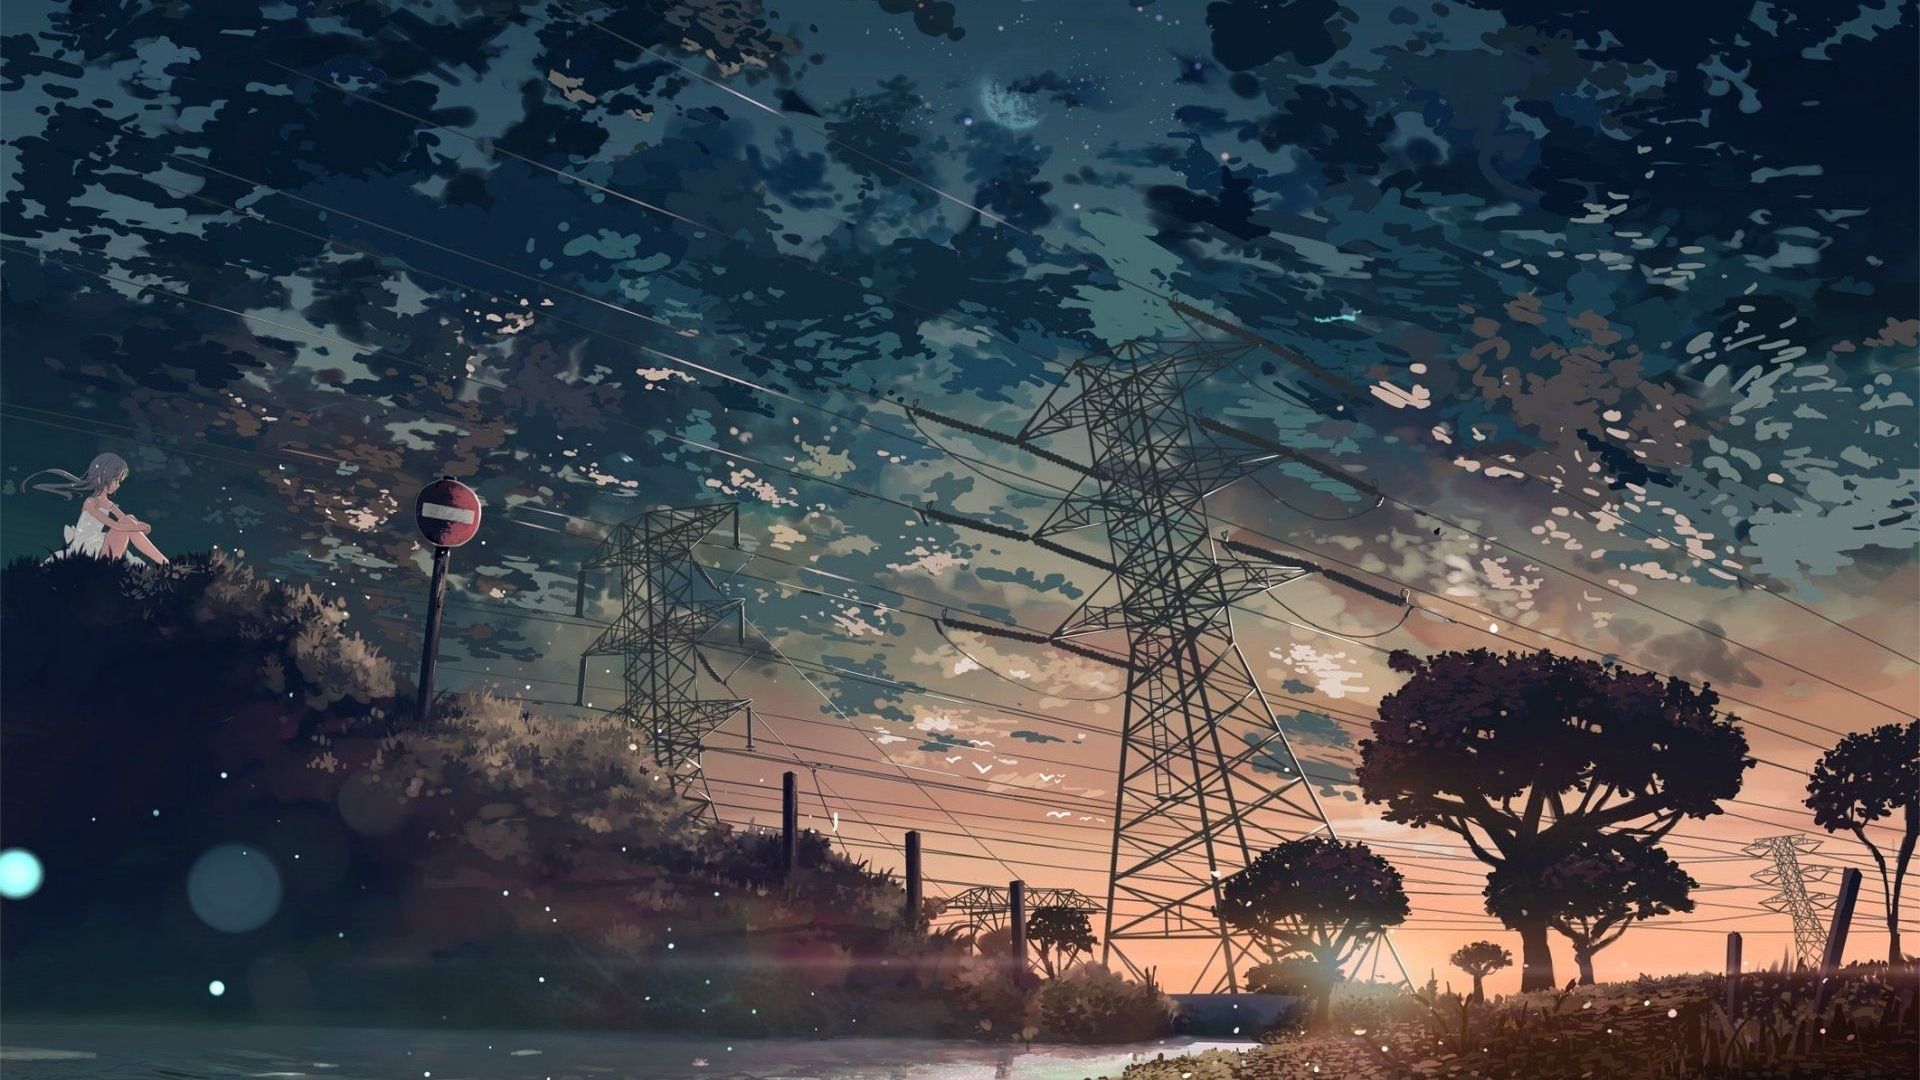 Free download 1920x1200 Awesome Aesthetic Anime Desktop Wallpaper Gallery [1920x1200] for your Desktop, Mobile & Tablet. Explore Aesthetic Wallpaper Anime. Aesthetic Wallpaper Anime, Lofi Anime Aesthetic iPad Wallpaper, Aesthetic Wallpaper